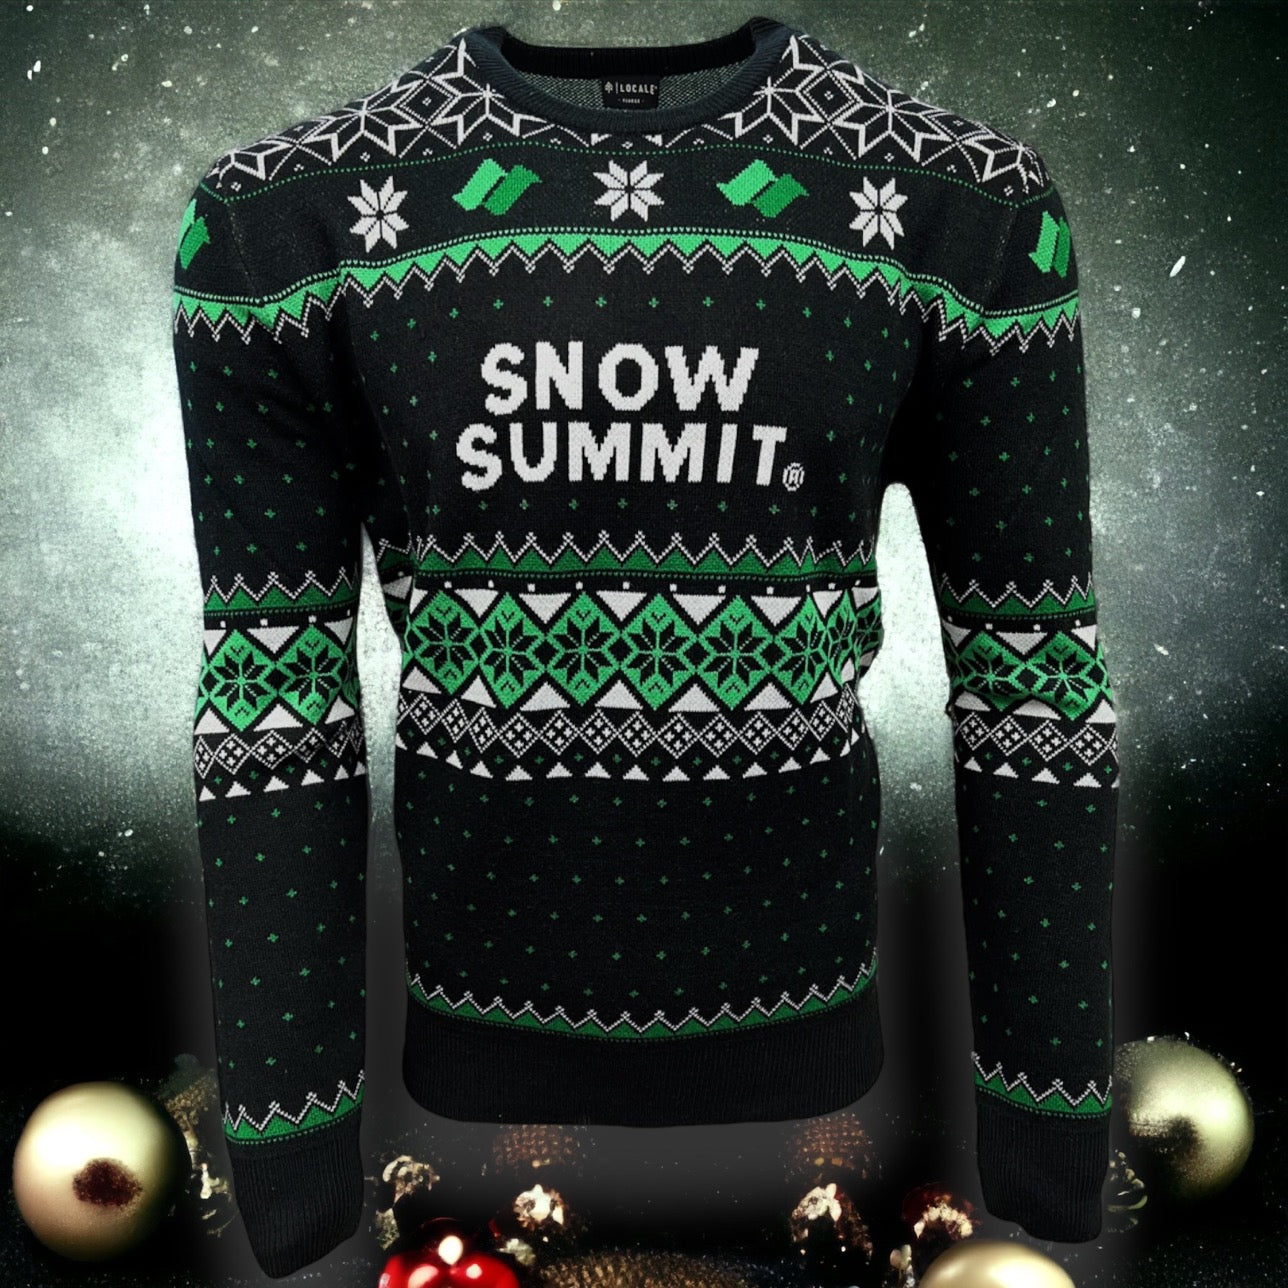 Snow Summit black white and green ugly sweater with snowflake design